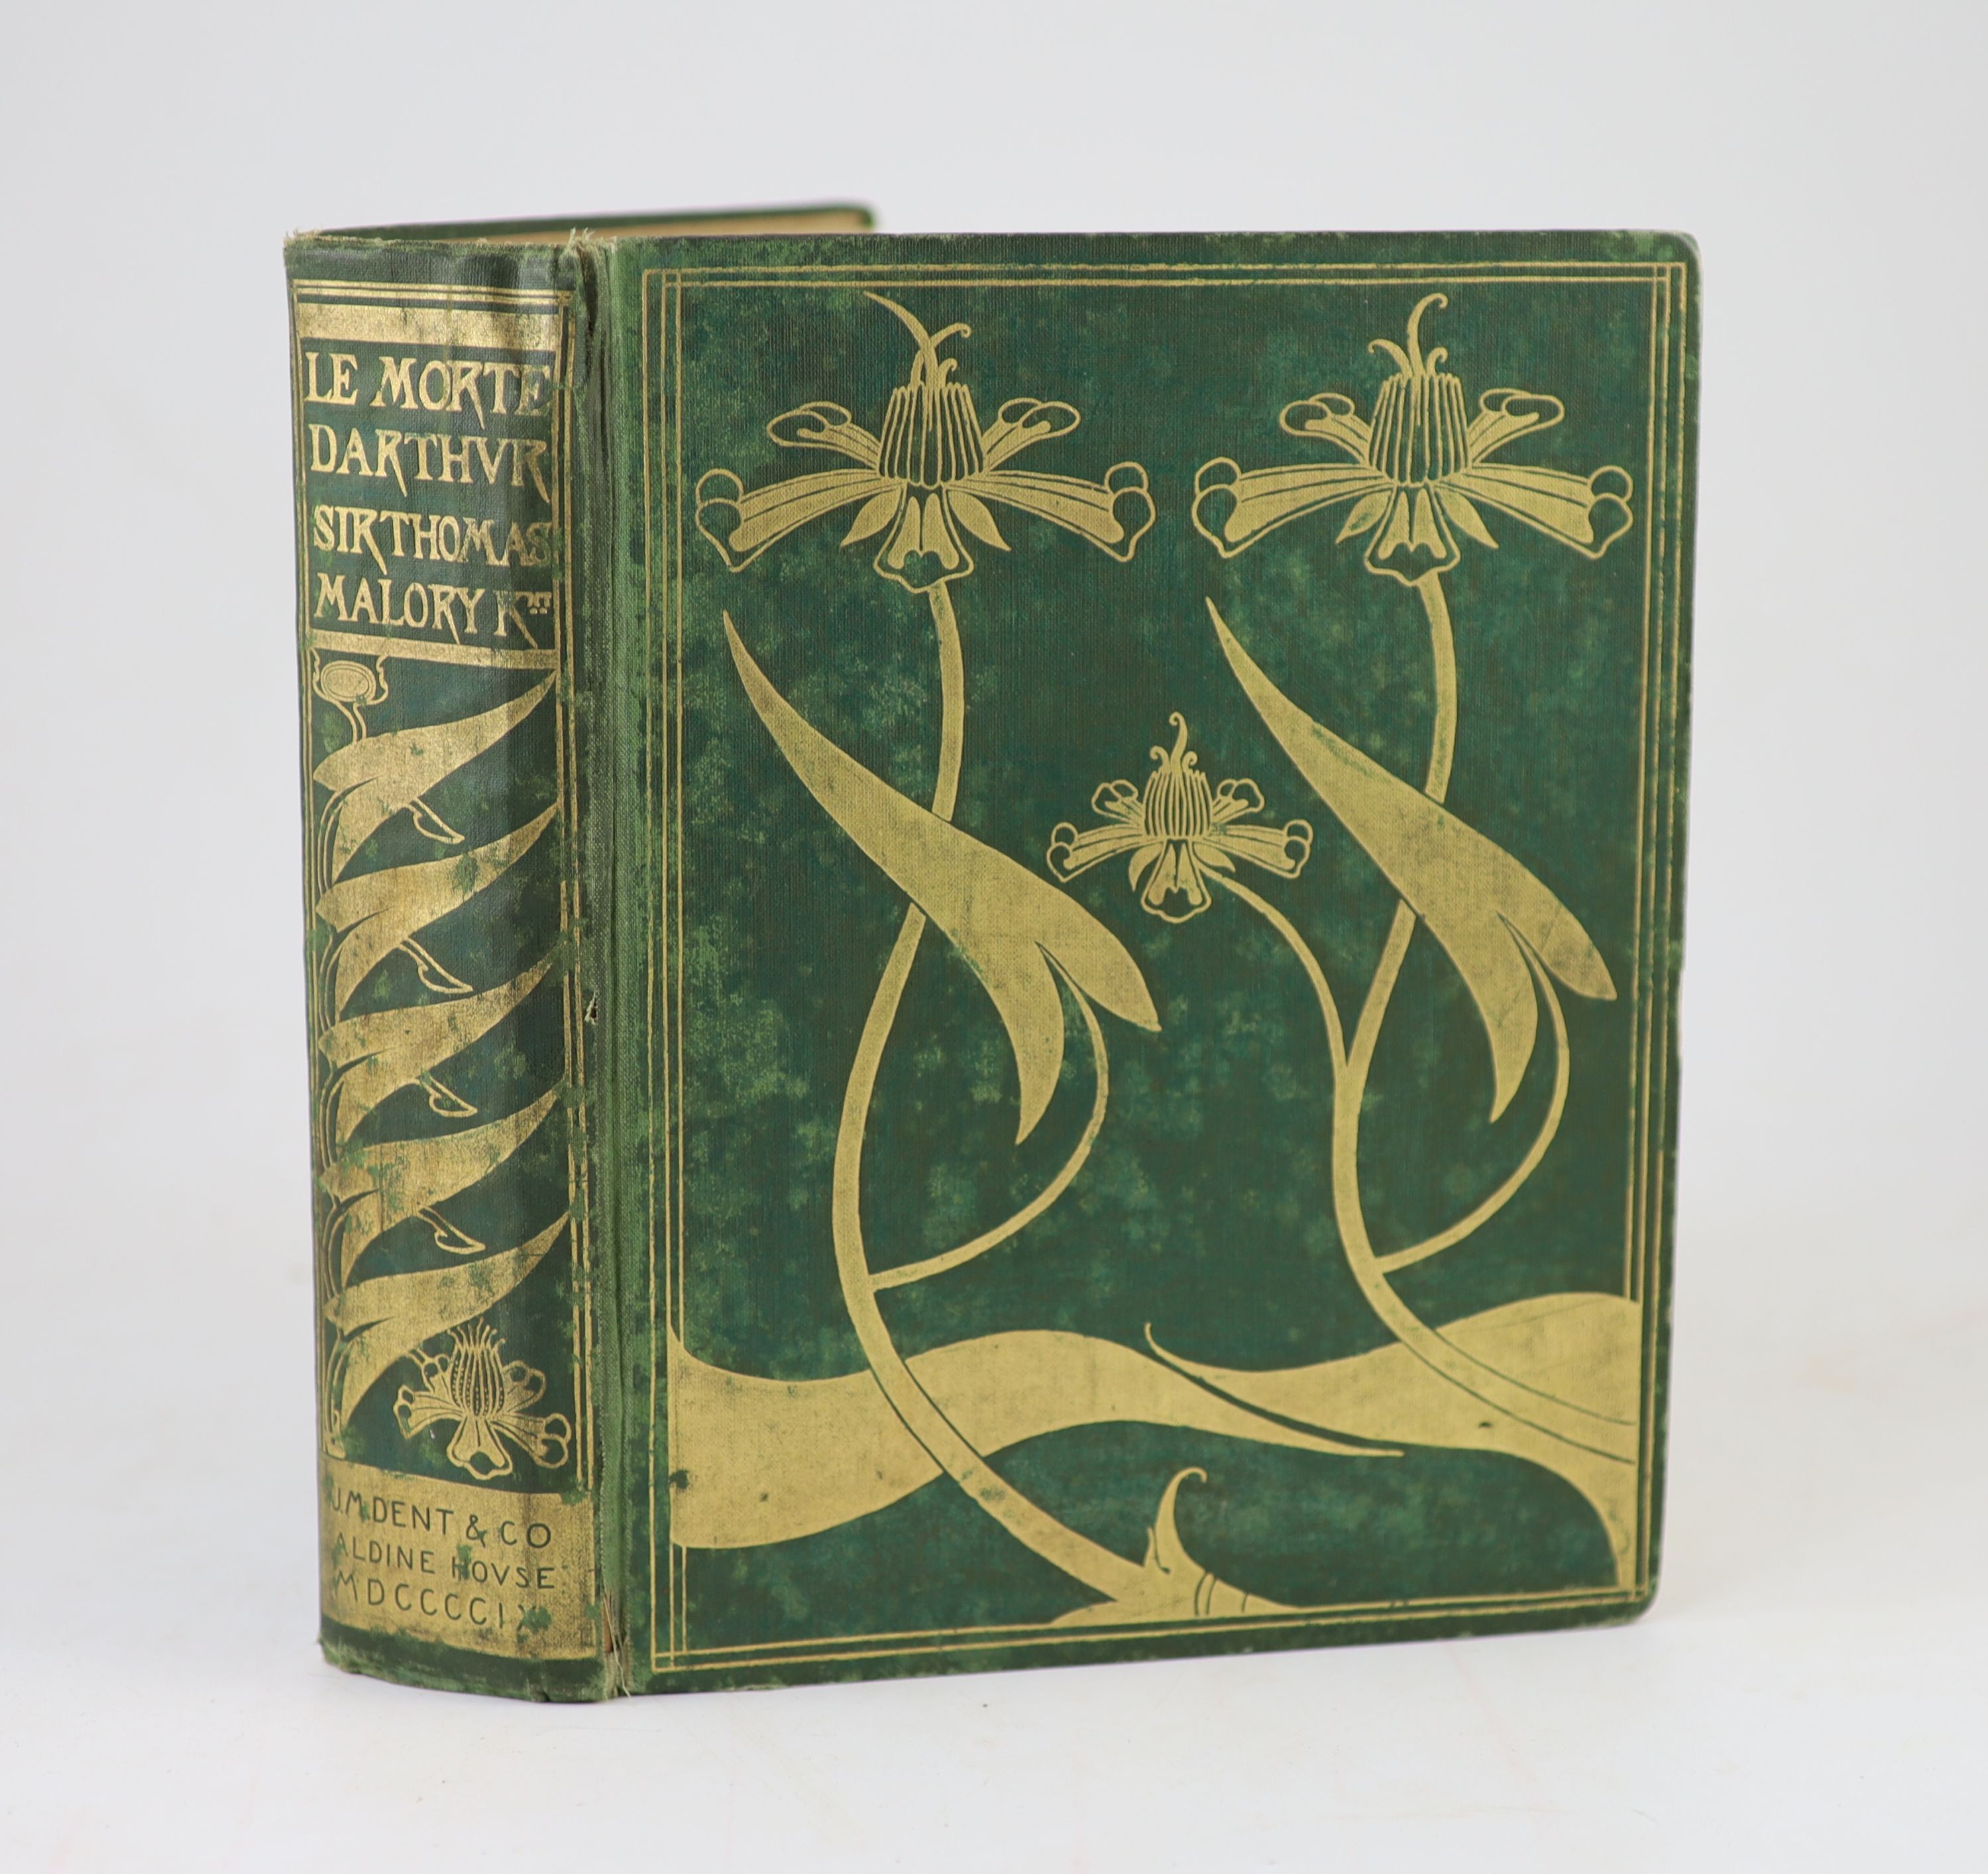 Malory, Thomas - Le Morte D’Arthur, 2nd edition, one of 1500 illustrated by Aubrey Beardsley, 4to, original green cloth, with an art nouveau floral design in gilt, J.M. Dent, London, 1909